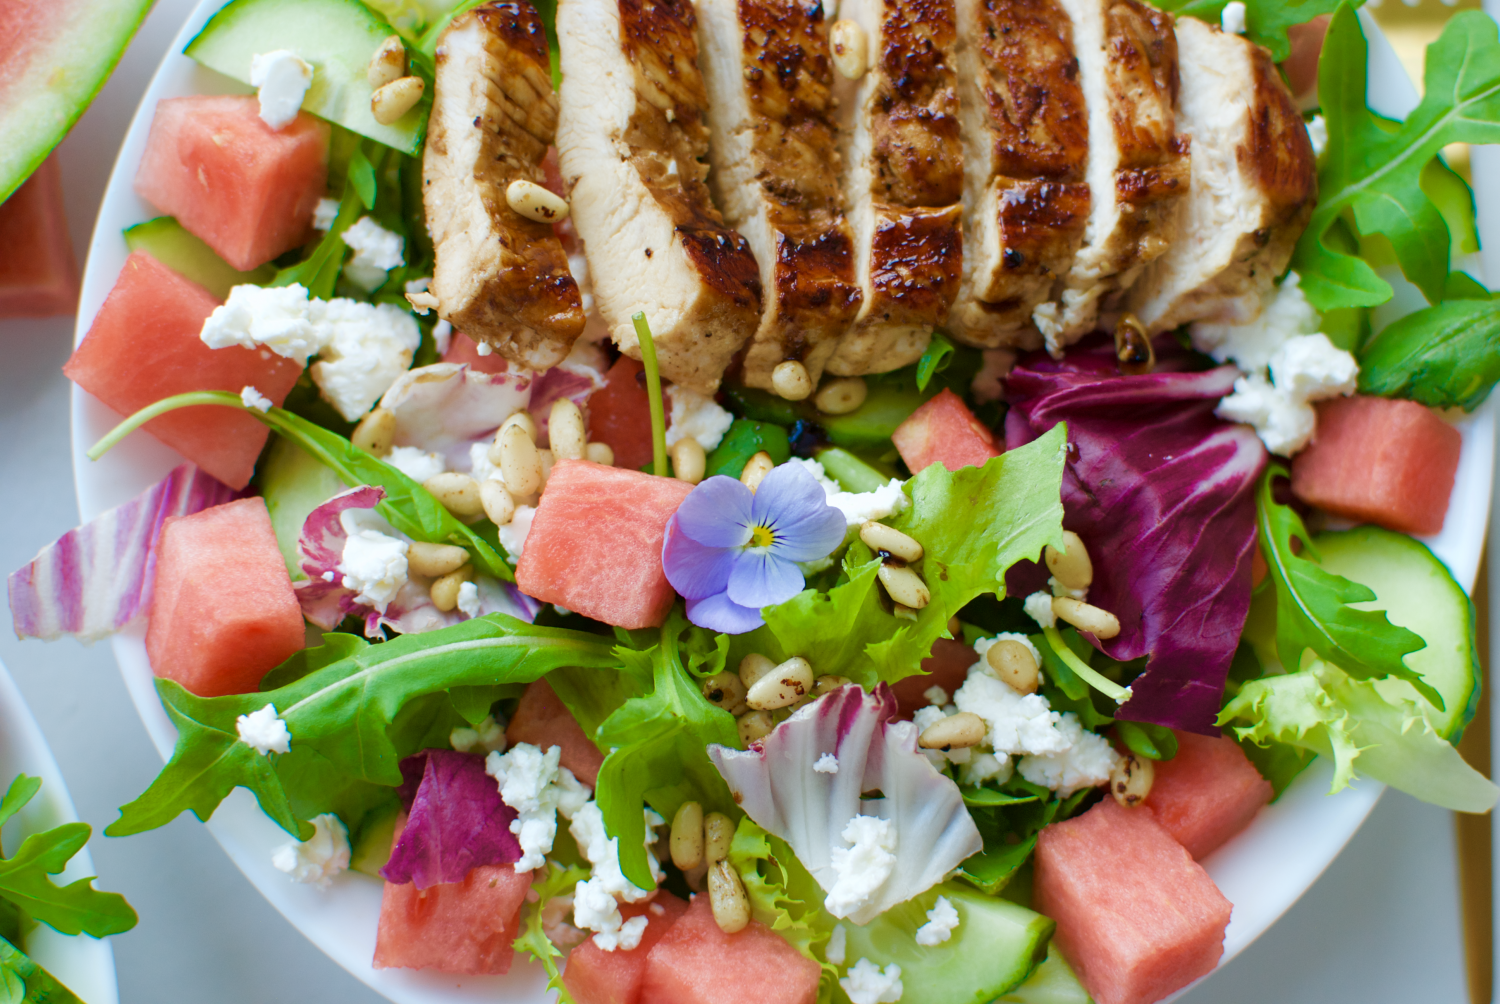 My favorite summery salad with watermelon, juicy balsamic glazed chicken, feta cheese and much more